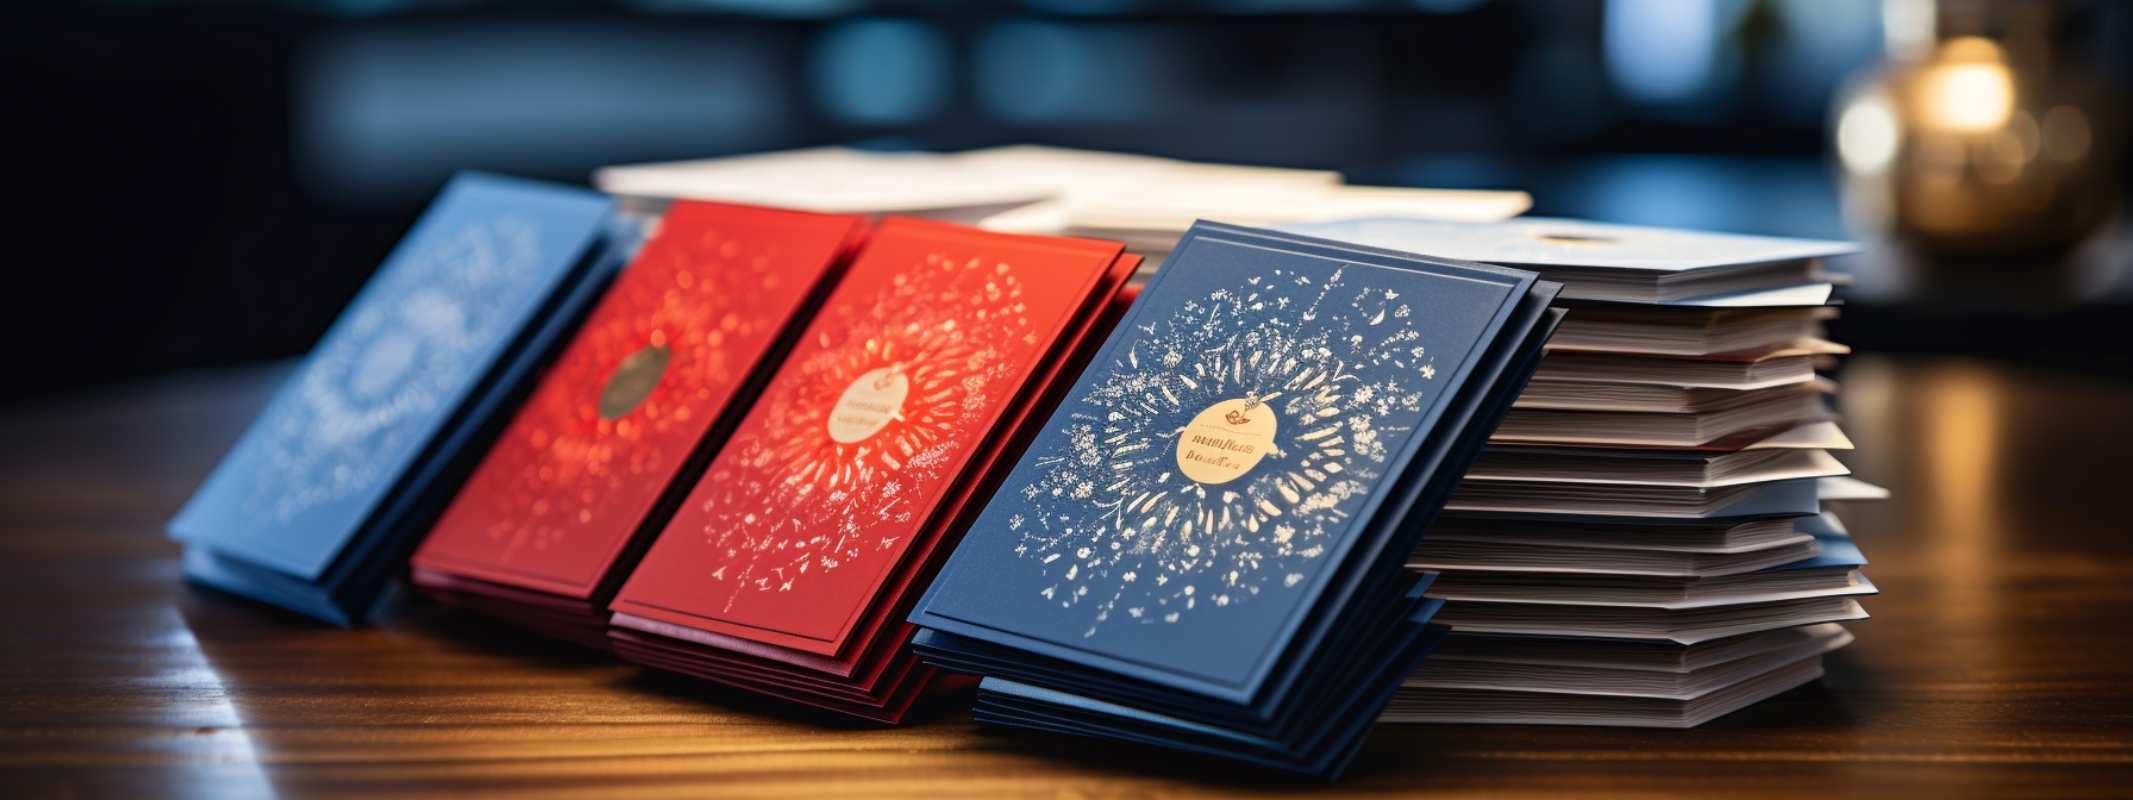 Understanding the Significance of Corporate Holiday Cards